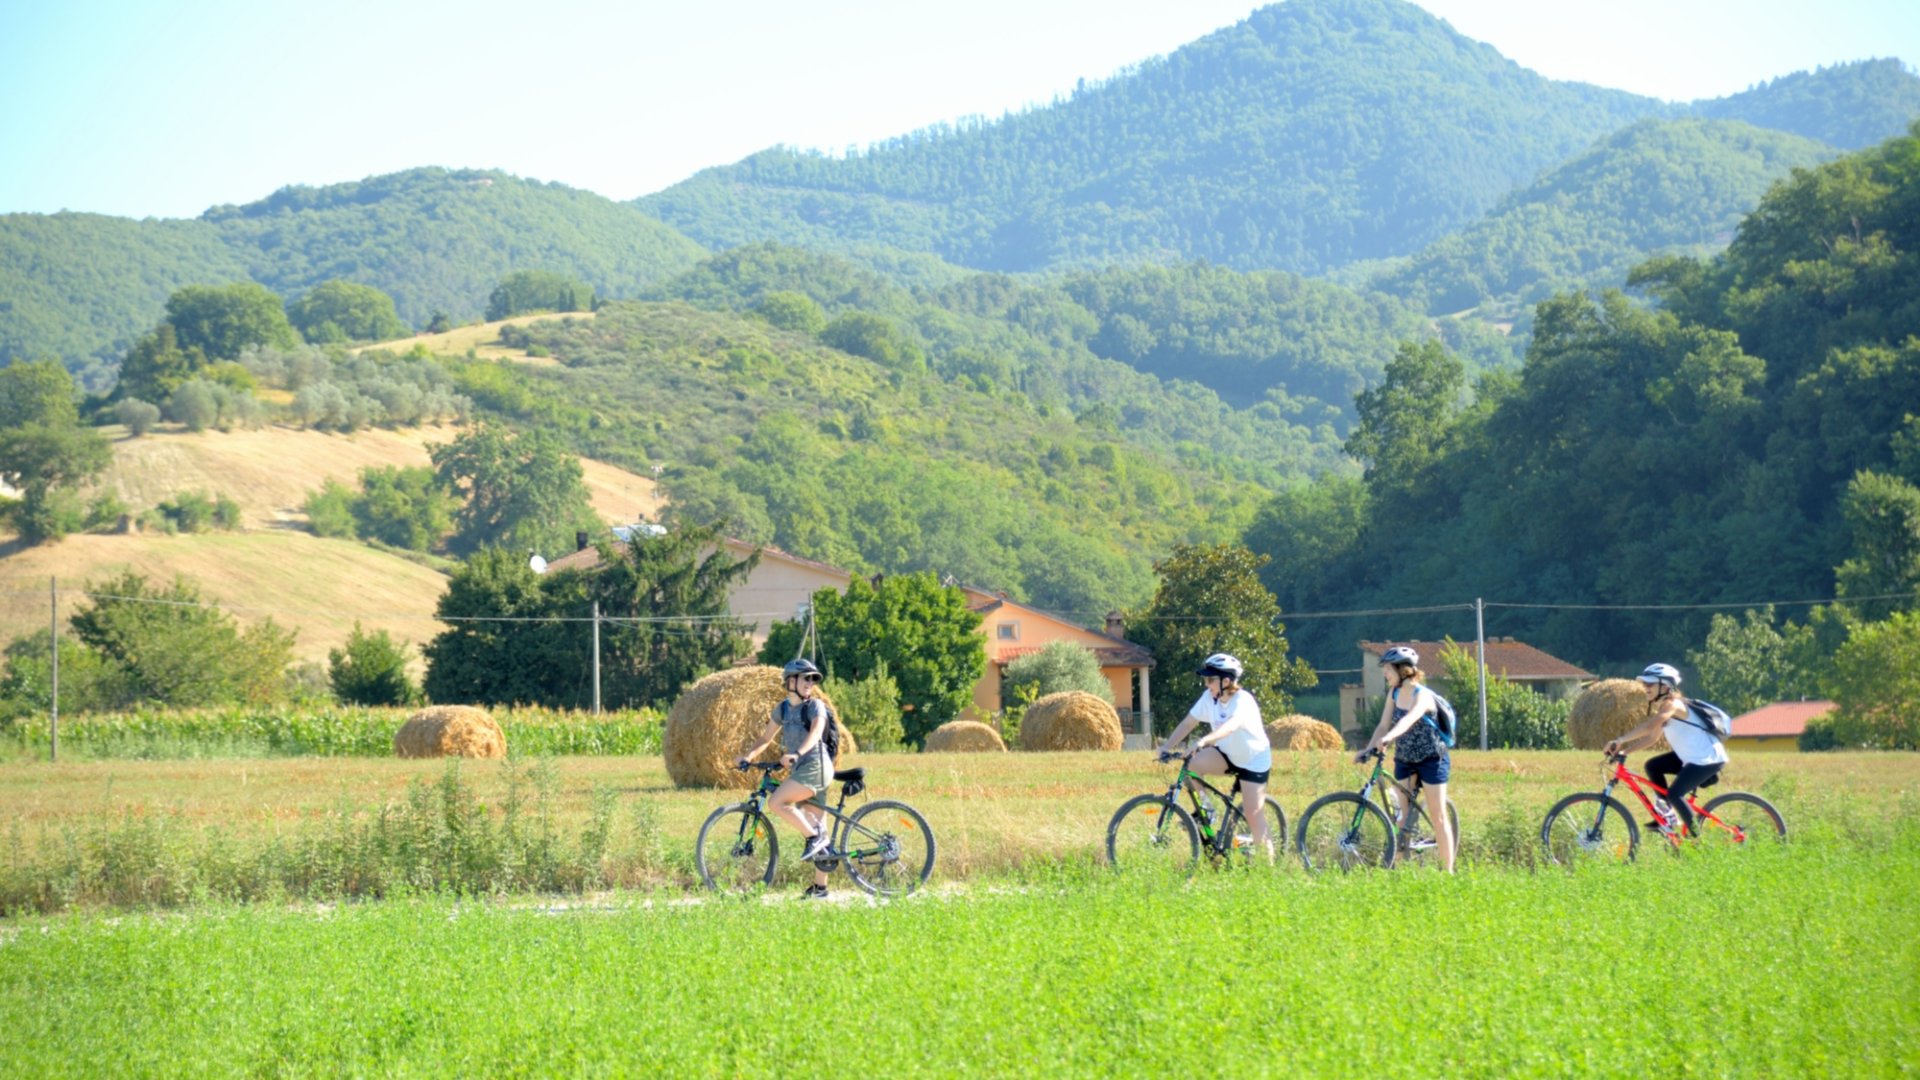 Cycling excursion to Vicchio in Mugello guided by Mugellove